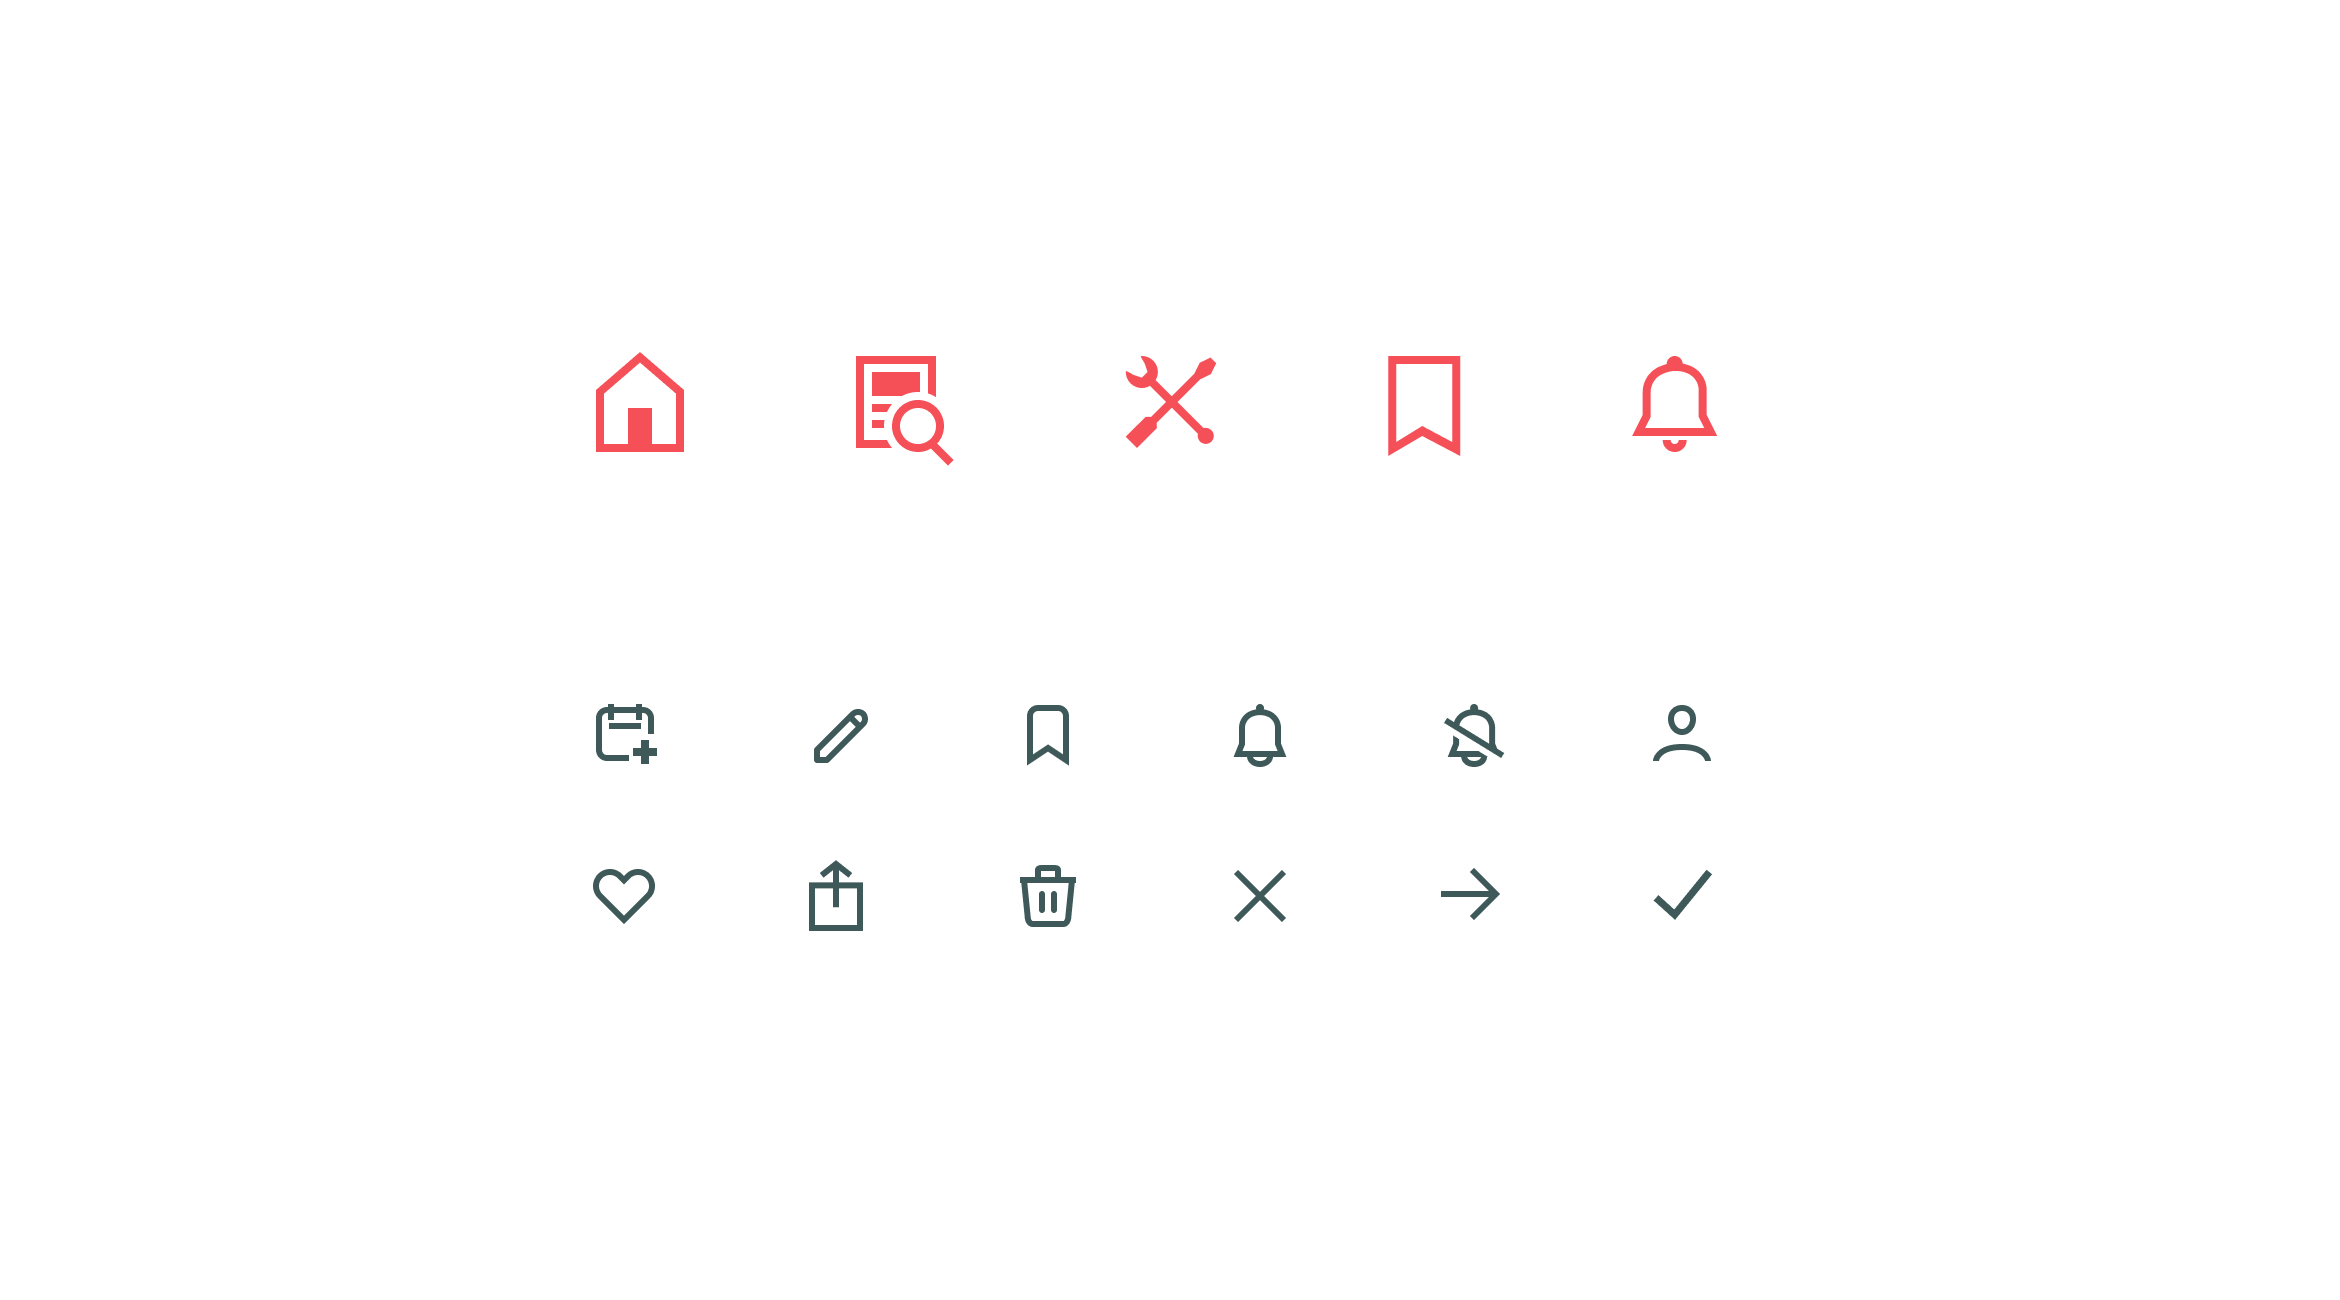 Custom icons for the app